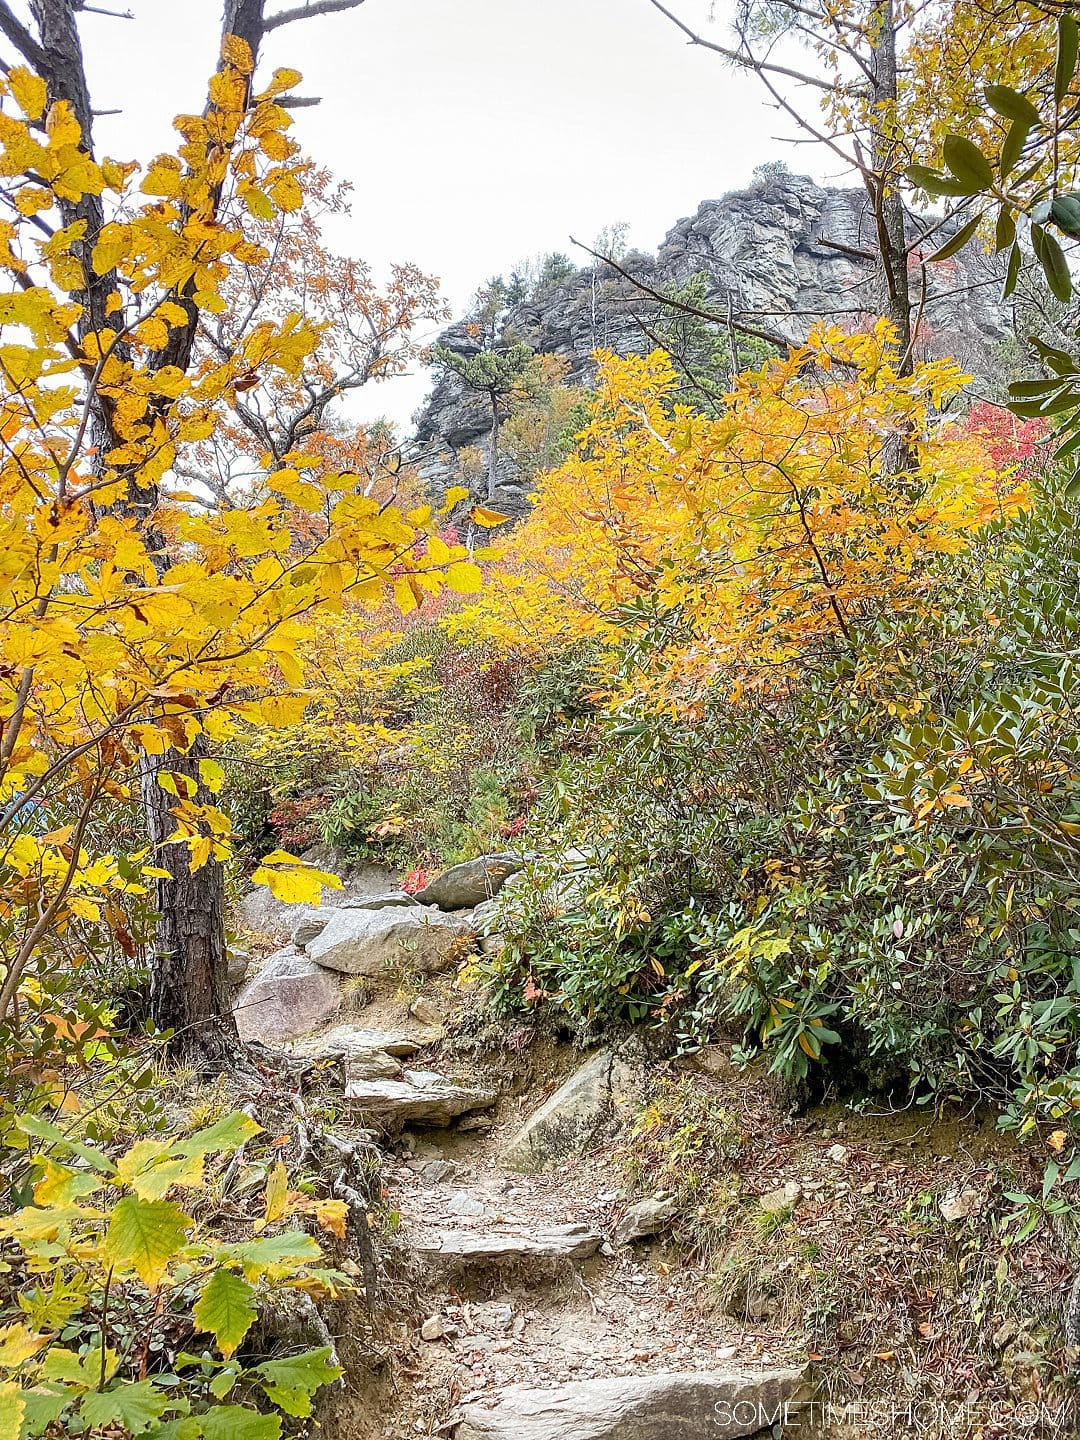 One of the best things to do in the North Carolina mountains is hike! And we have your guide to the best hiking near Morganton, NC in Burke County near the Blue Ridge Mountains. Fall colors were at their peak in the Appalachian Mountains range at the time we took this beautiful photography at Table Rock in Linville Gorge Wilderness area. #sometimeshome #besthikingnorthcarolina #autumncolors #peakfallleaves #blueridgemountains